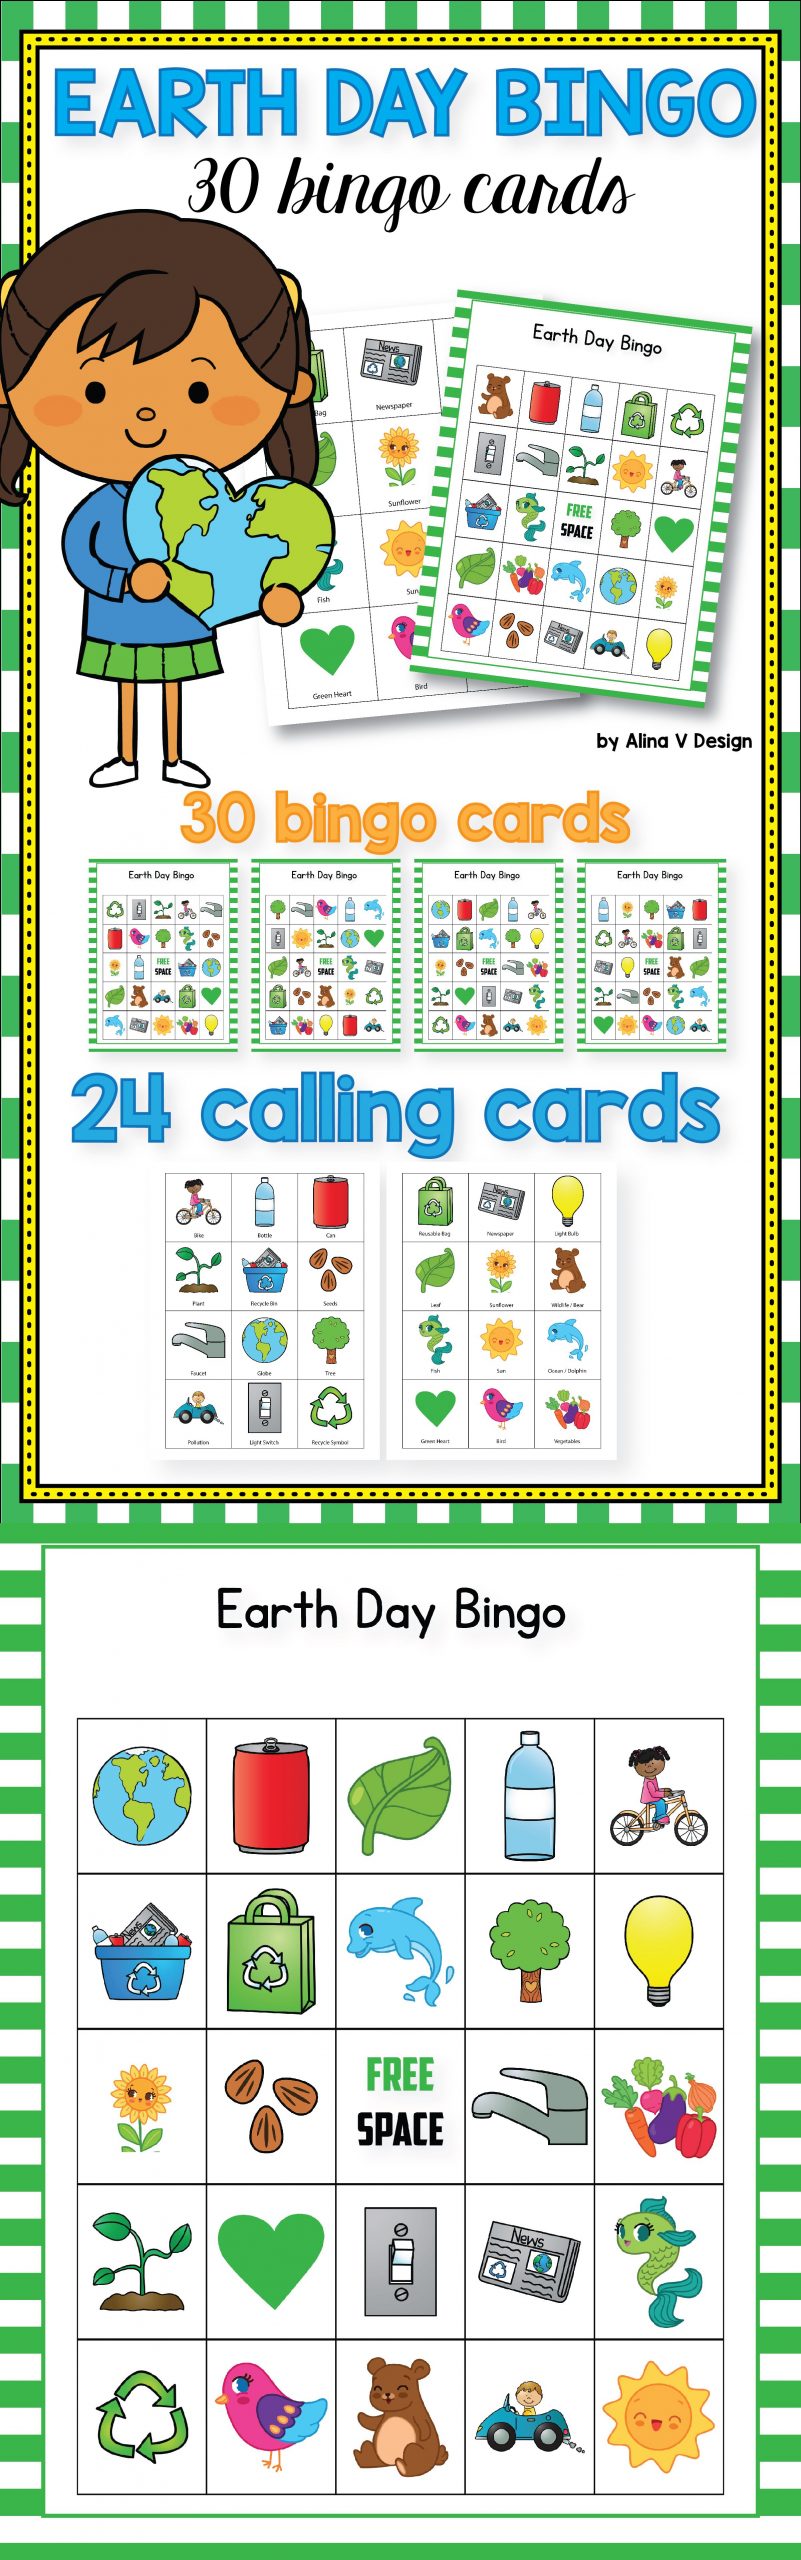 Earth Day Bingo Printable For Kids And Students Is A Fun 